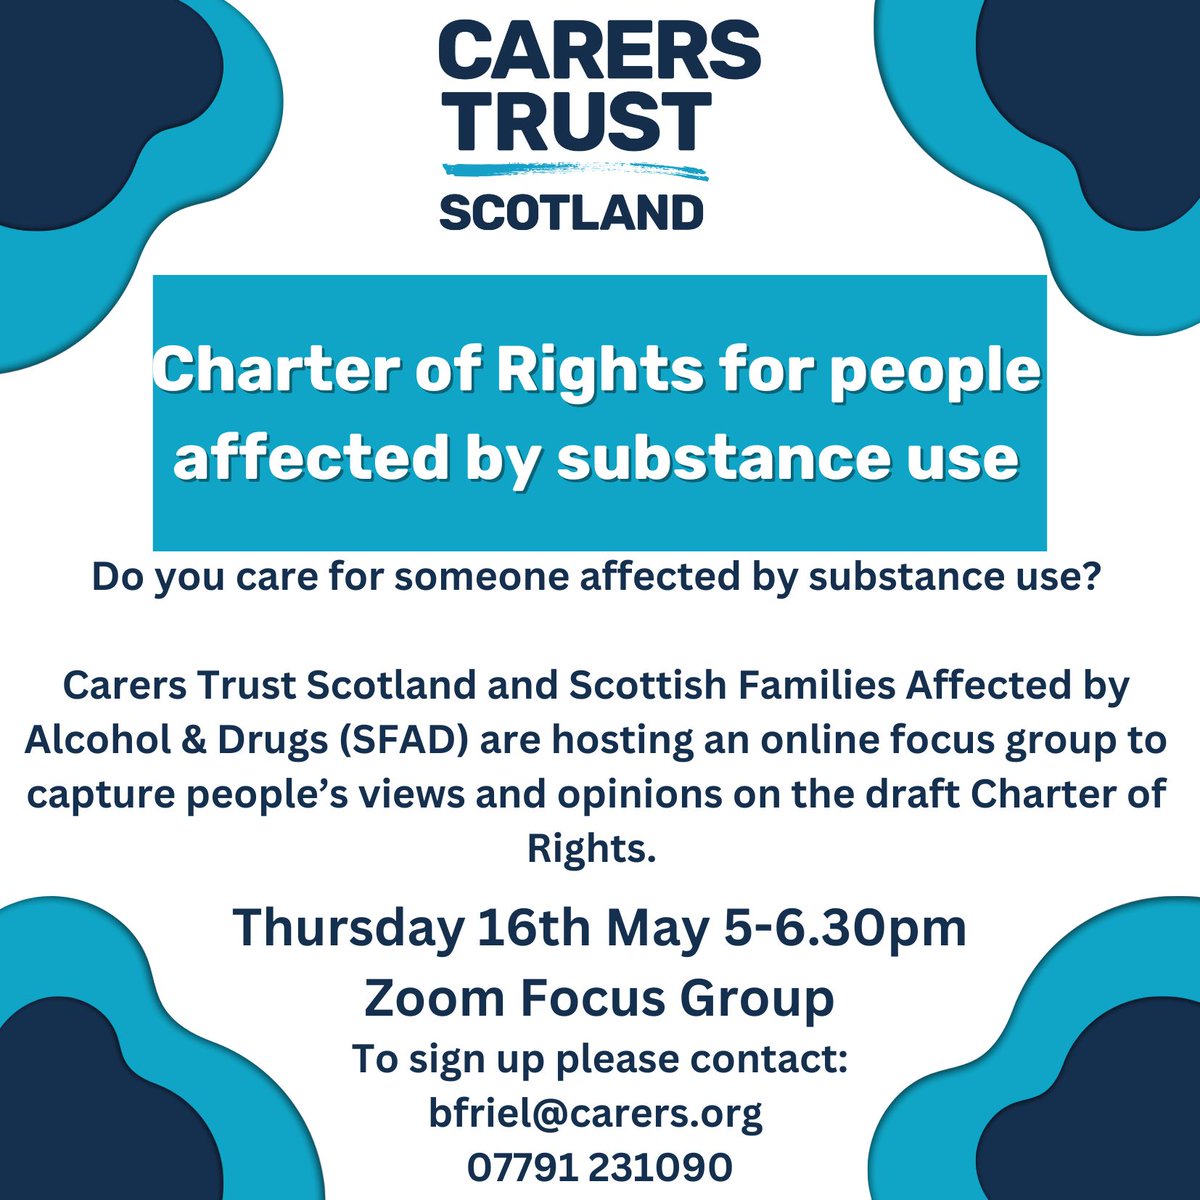 Do you care for someone affected by substance use? We are holding an online focus group alongside @ScotFamADrugs to capture people's views and opinions on the draft Charter of Rights. Thursday 16th May 5-6:30pm on Zoom More details below👇